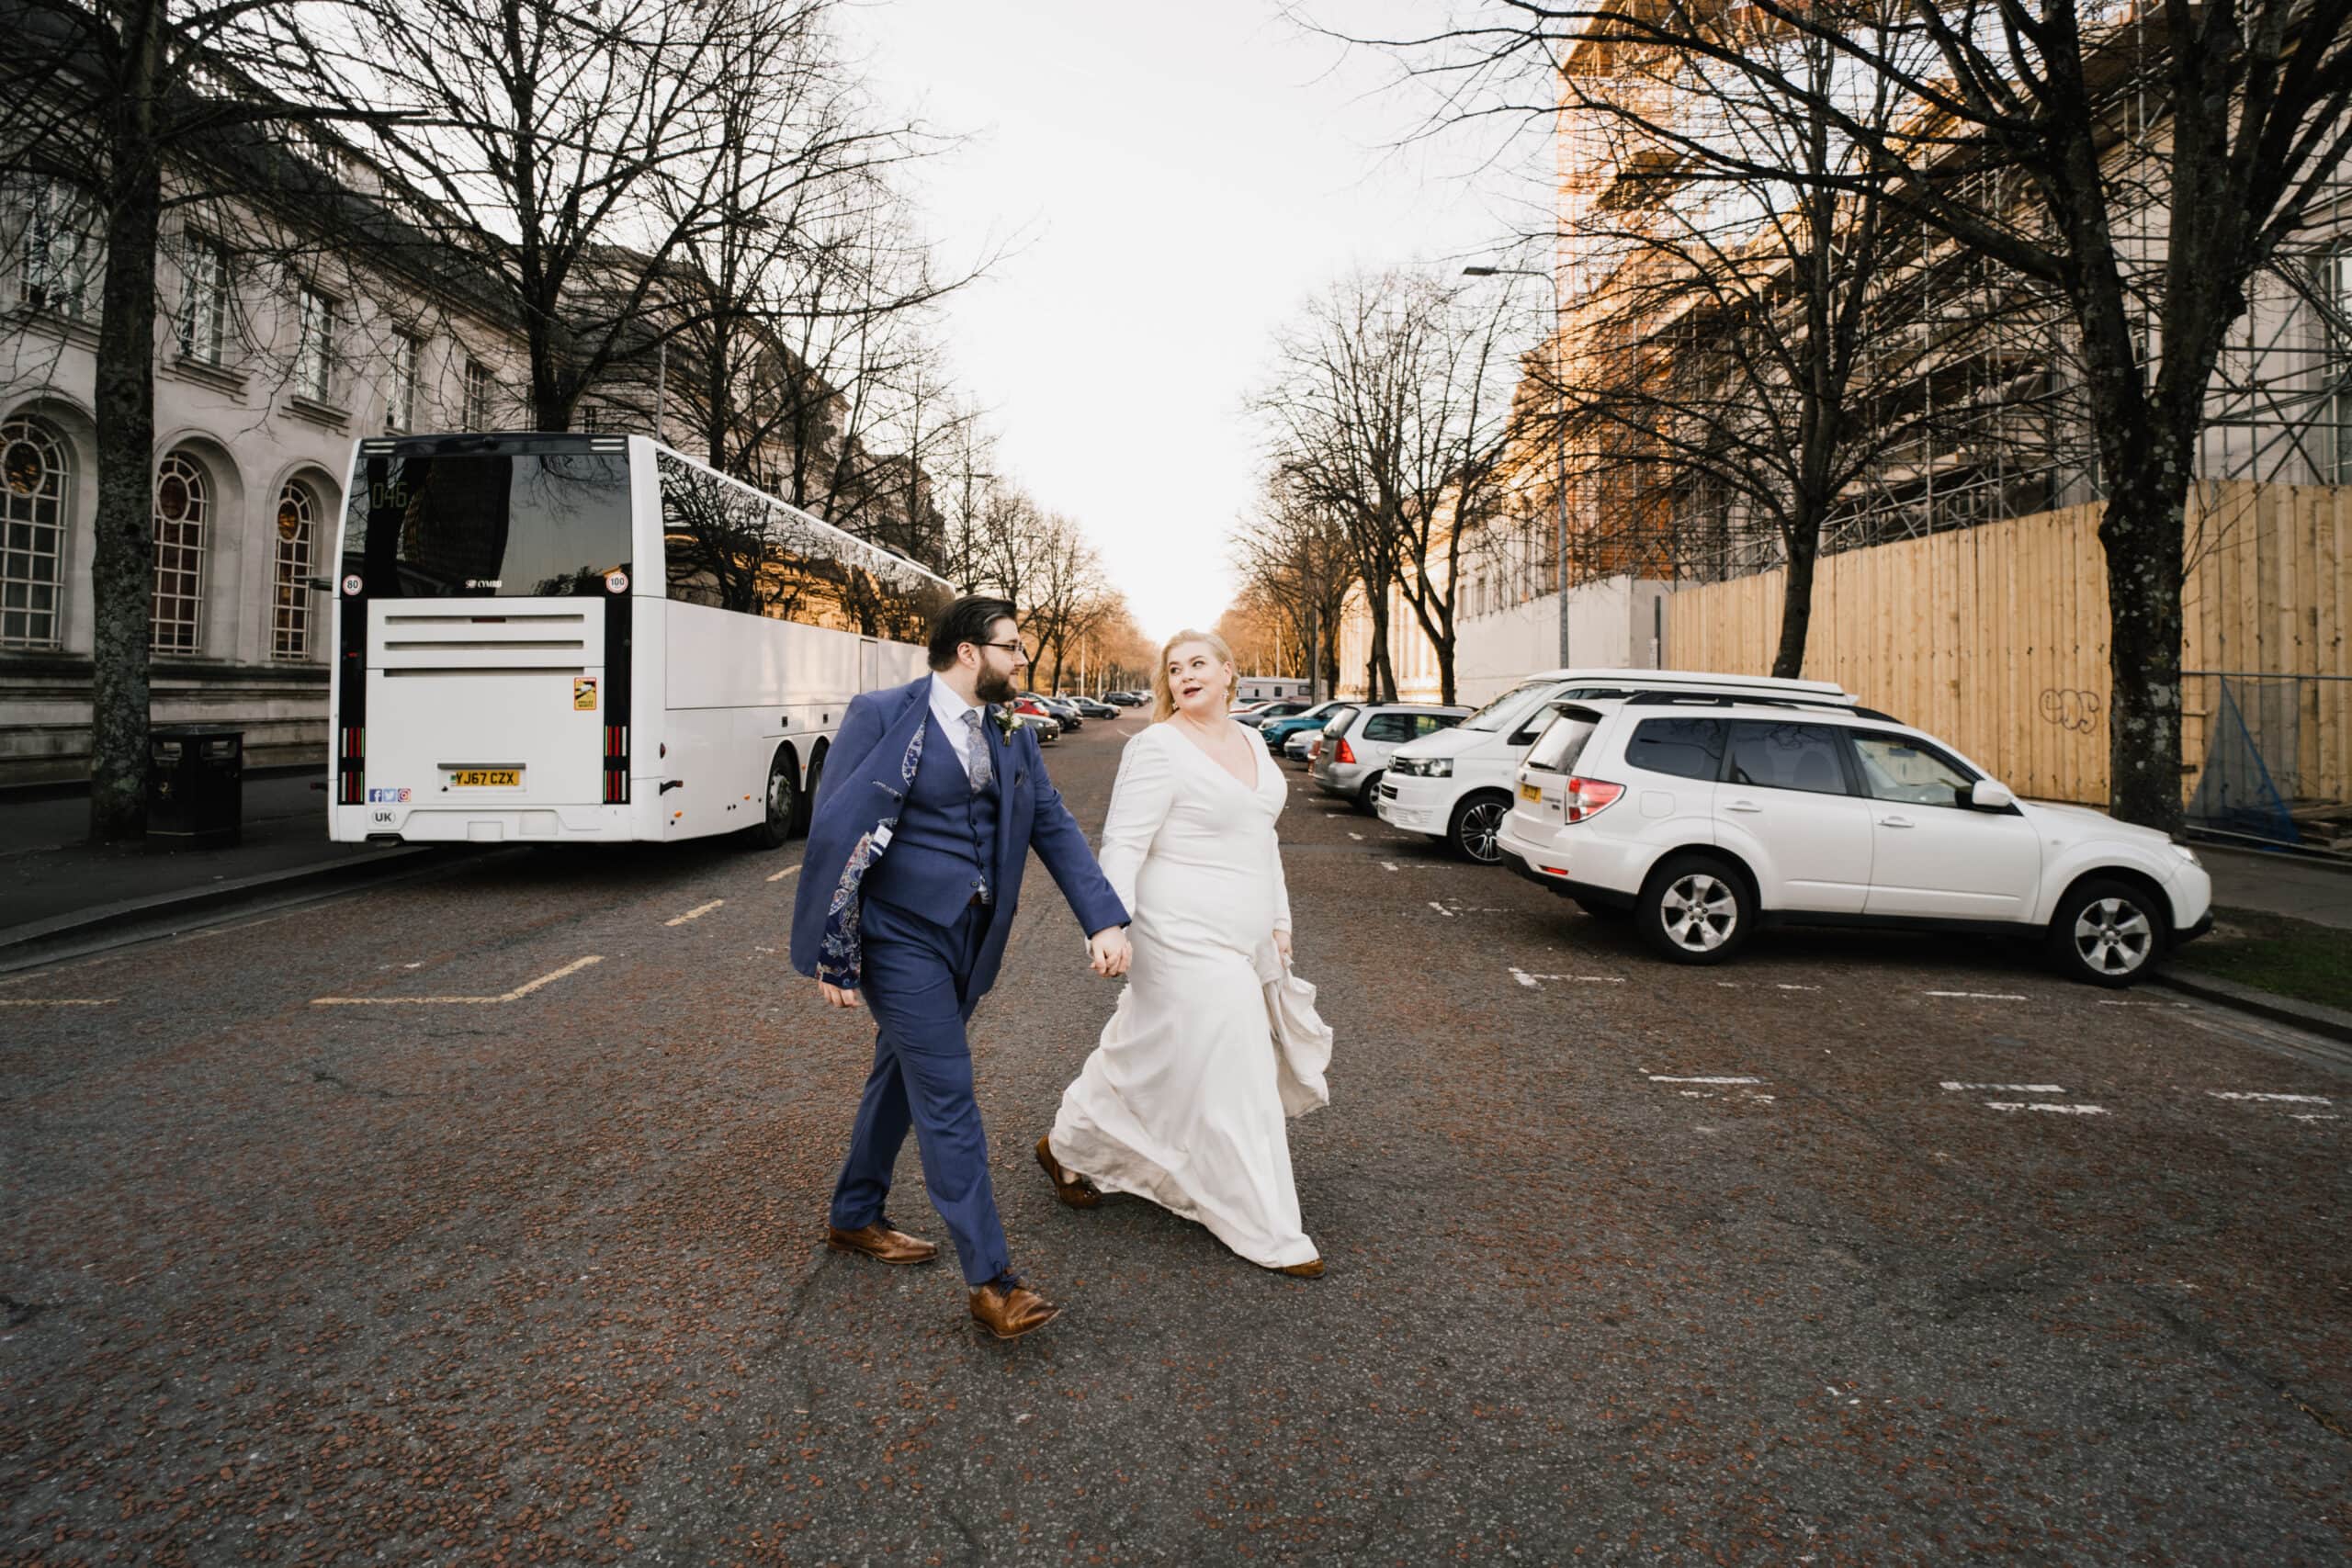 A joyful bride in a white dress holds hands with a partner in a blue suit, crossing a city street with parked cars and a white bus on the side.